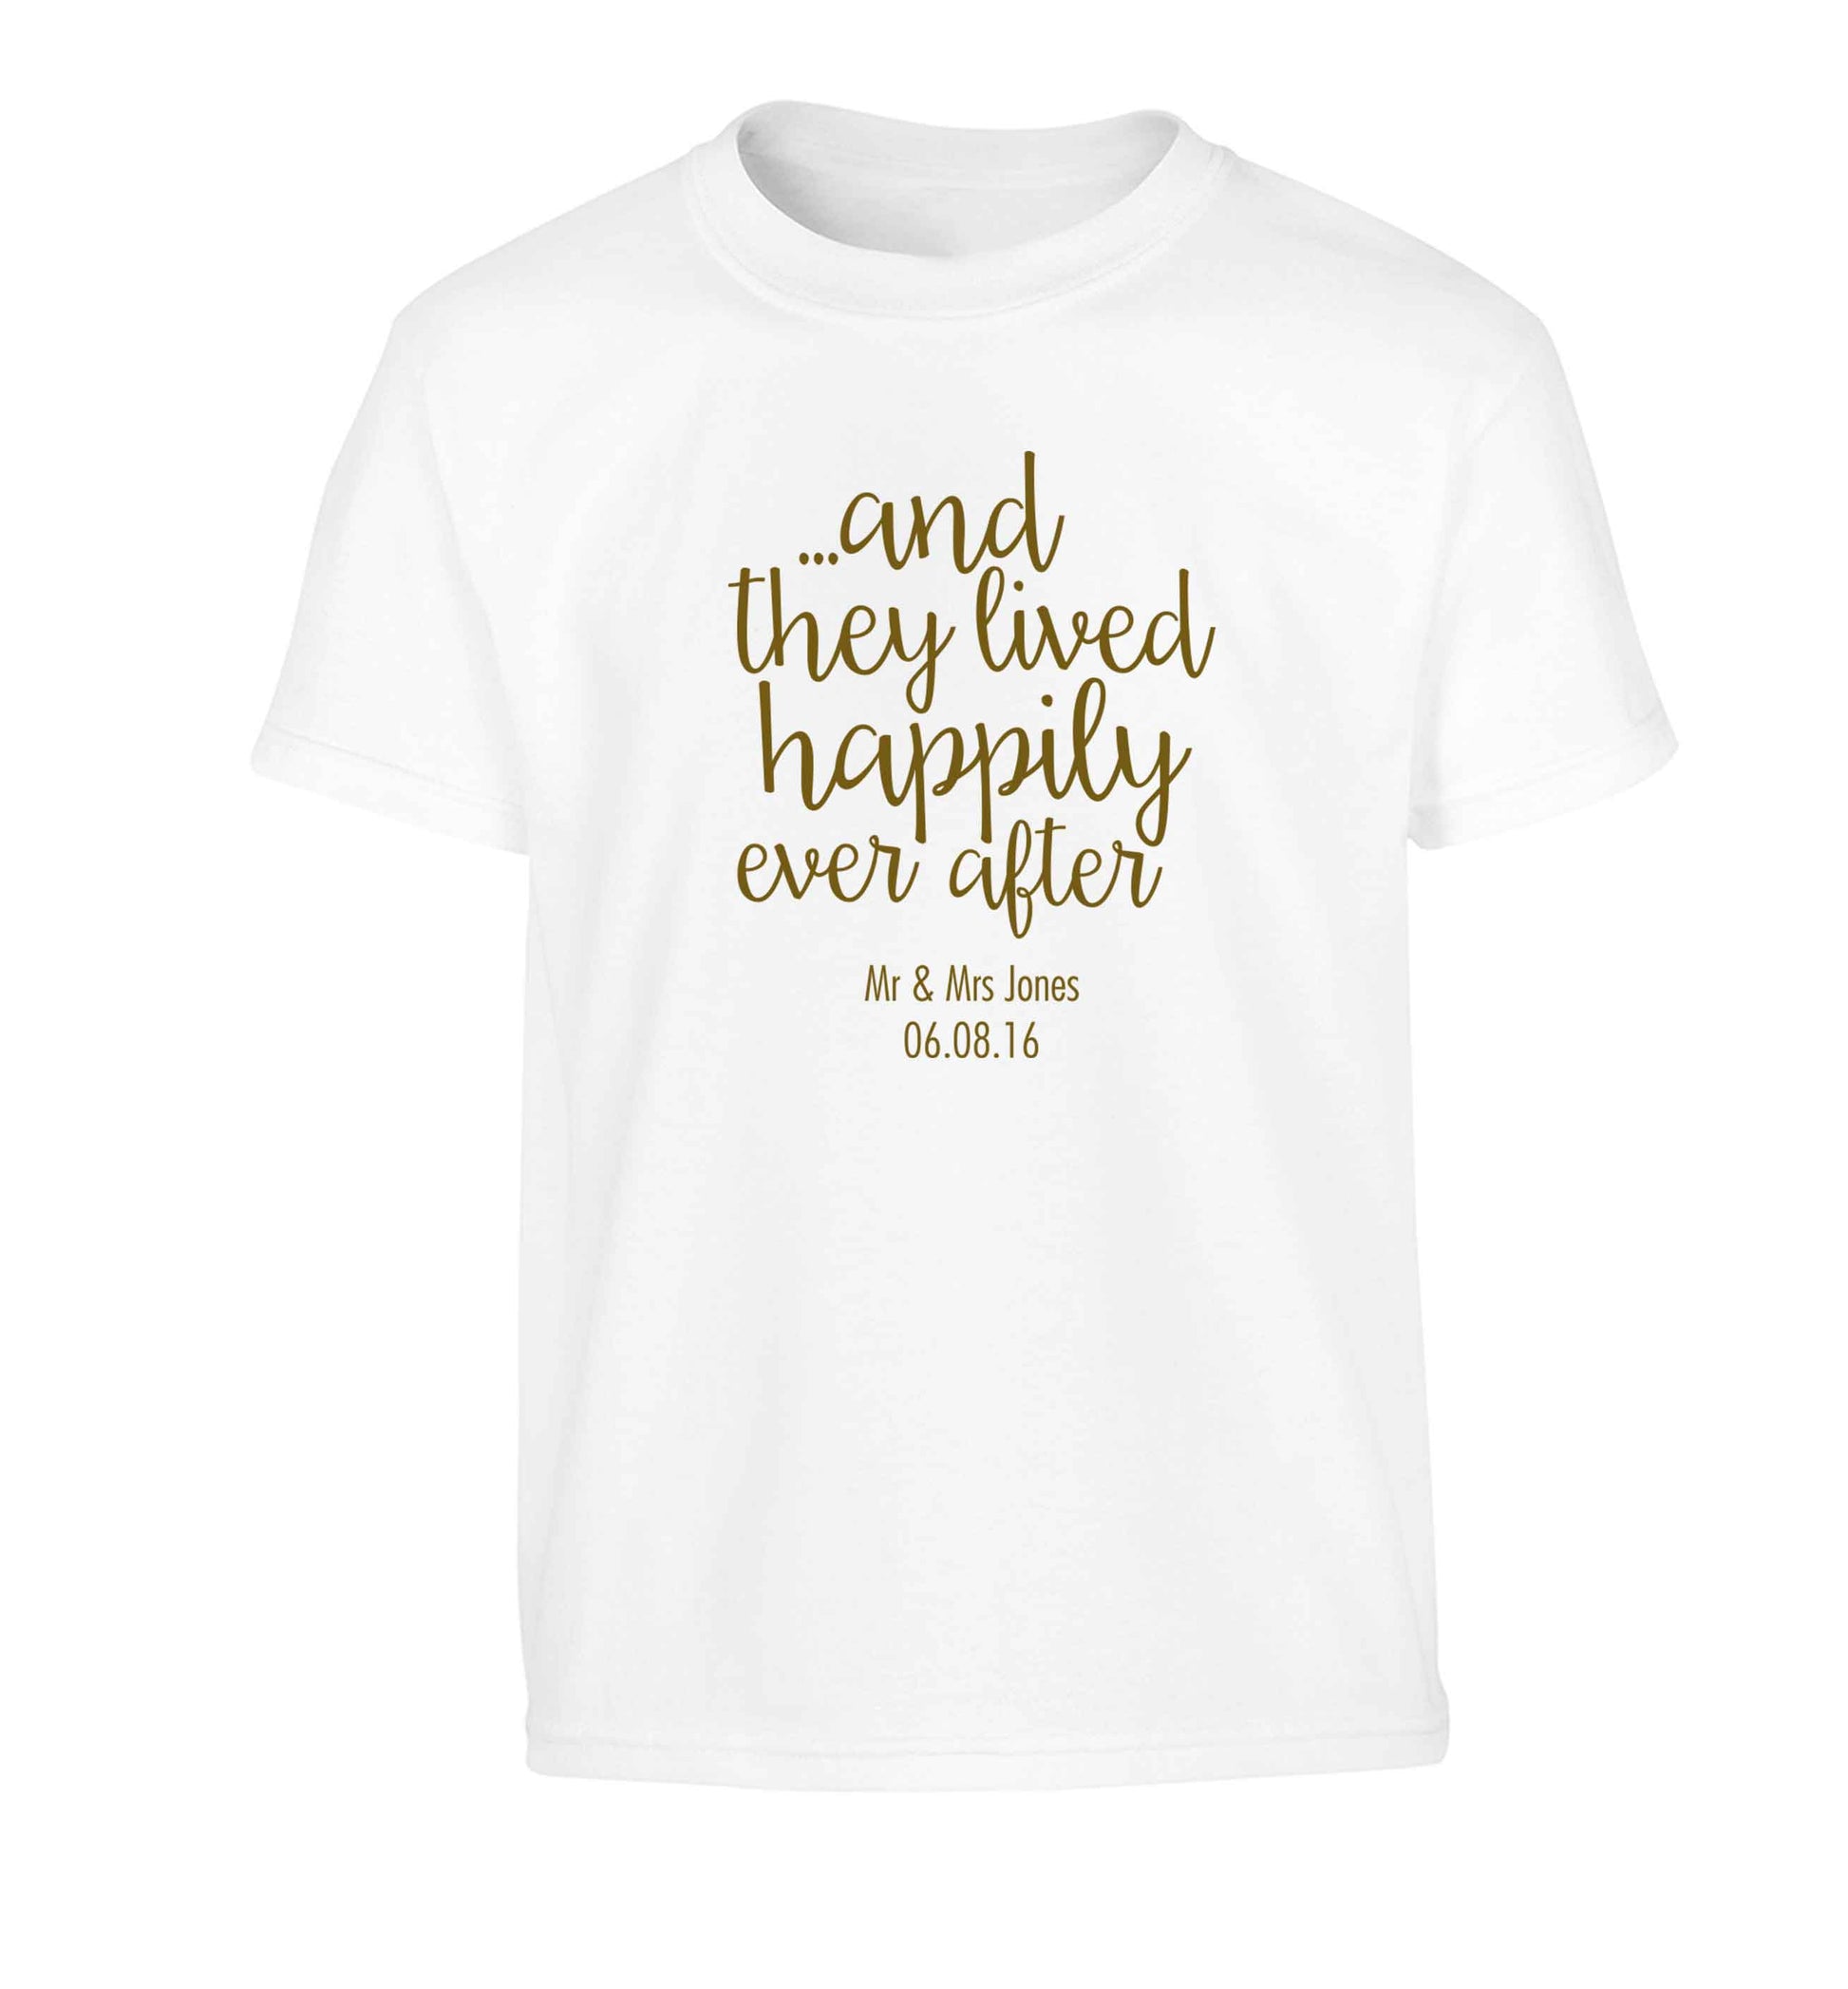 ...and they lived happily ever after - personalised date and names Children's white Tshirt 12-13 Years